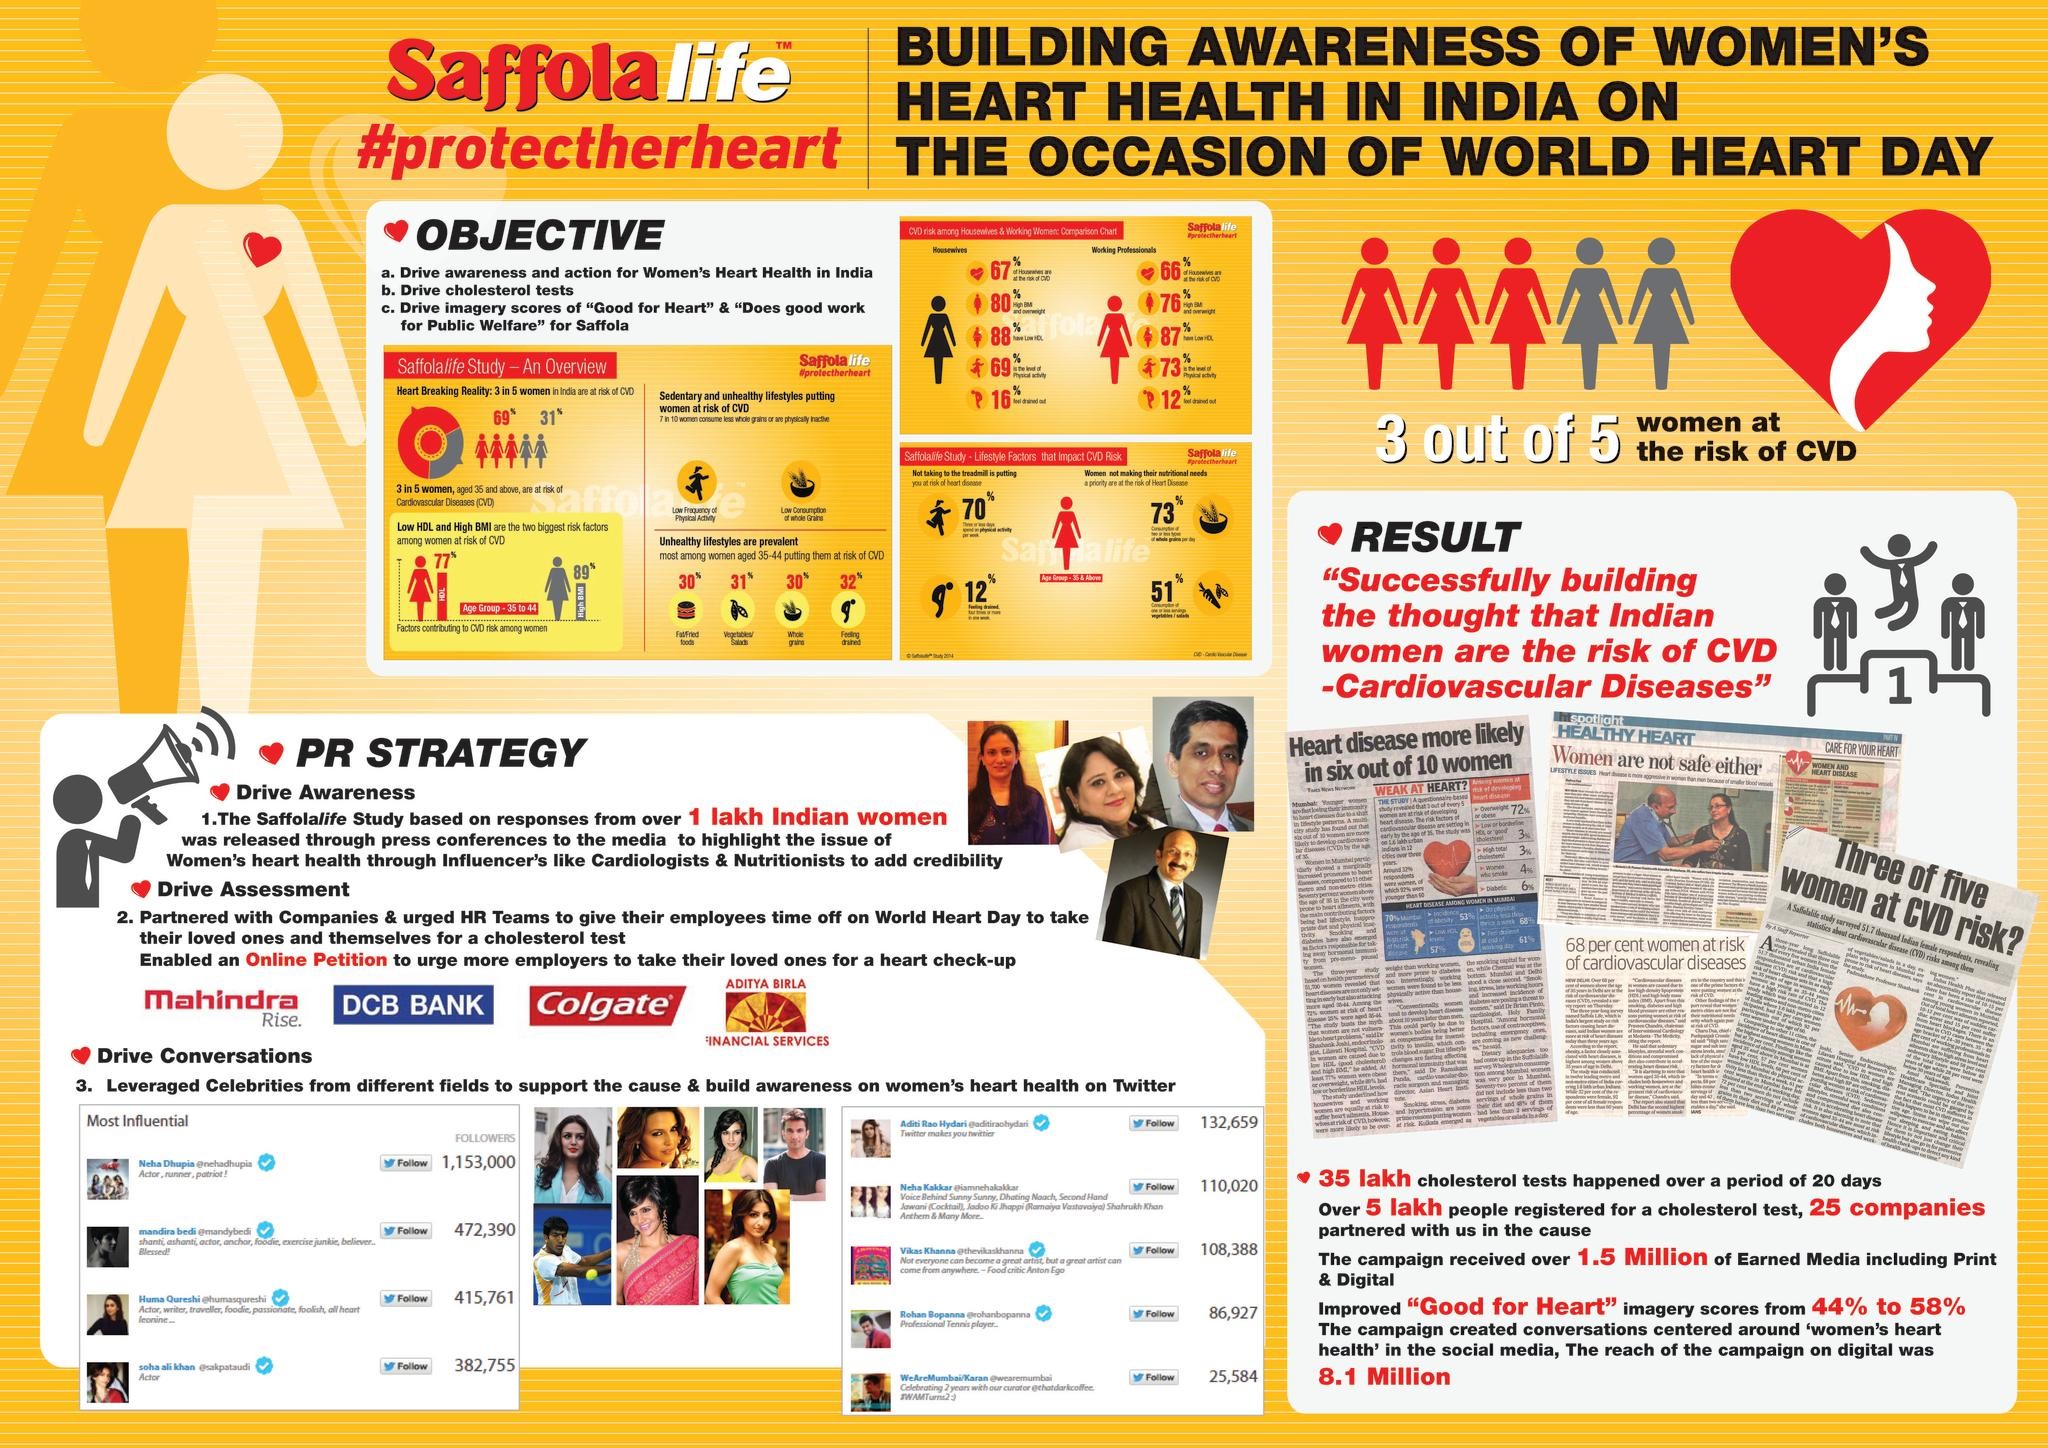 BUILDING AWARENESS ON WOMEN'S HEART HEALTH IN INDIA – SAFFOLA